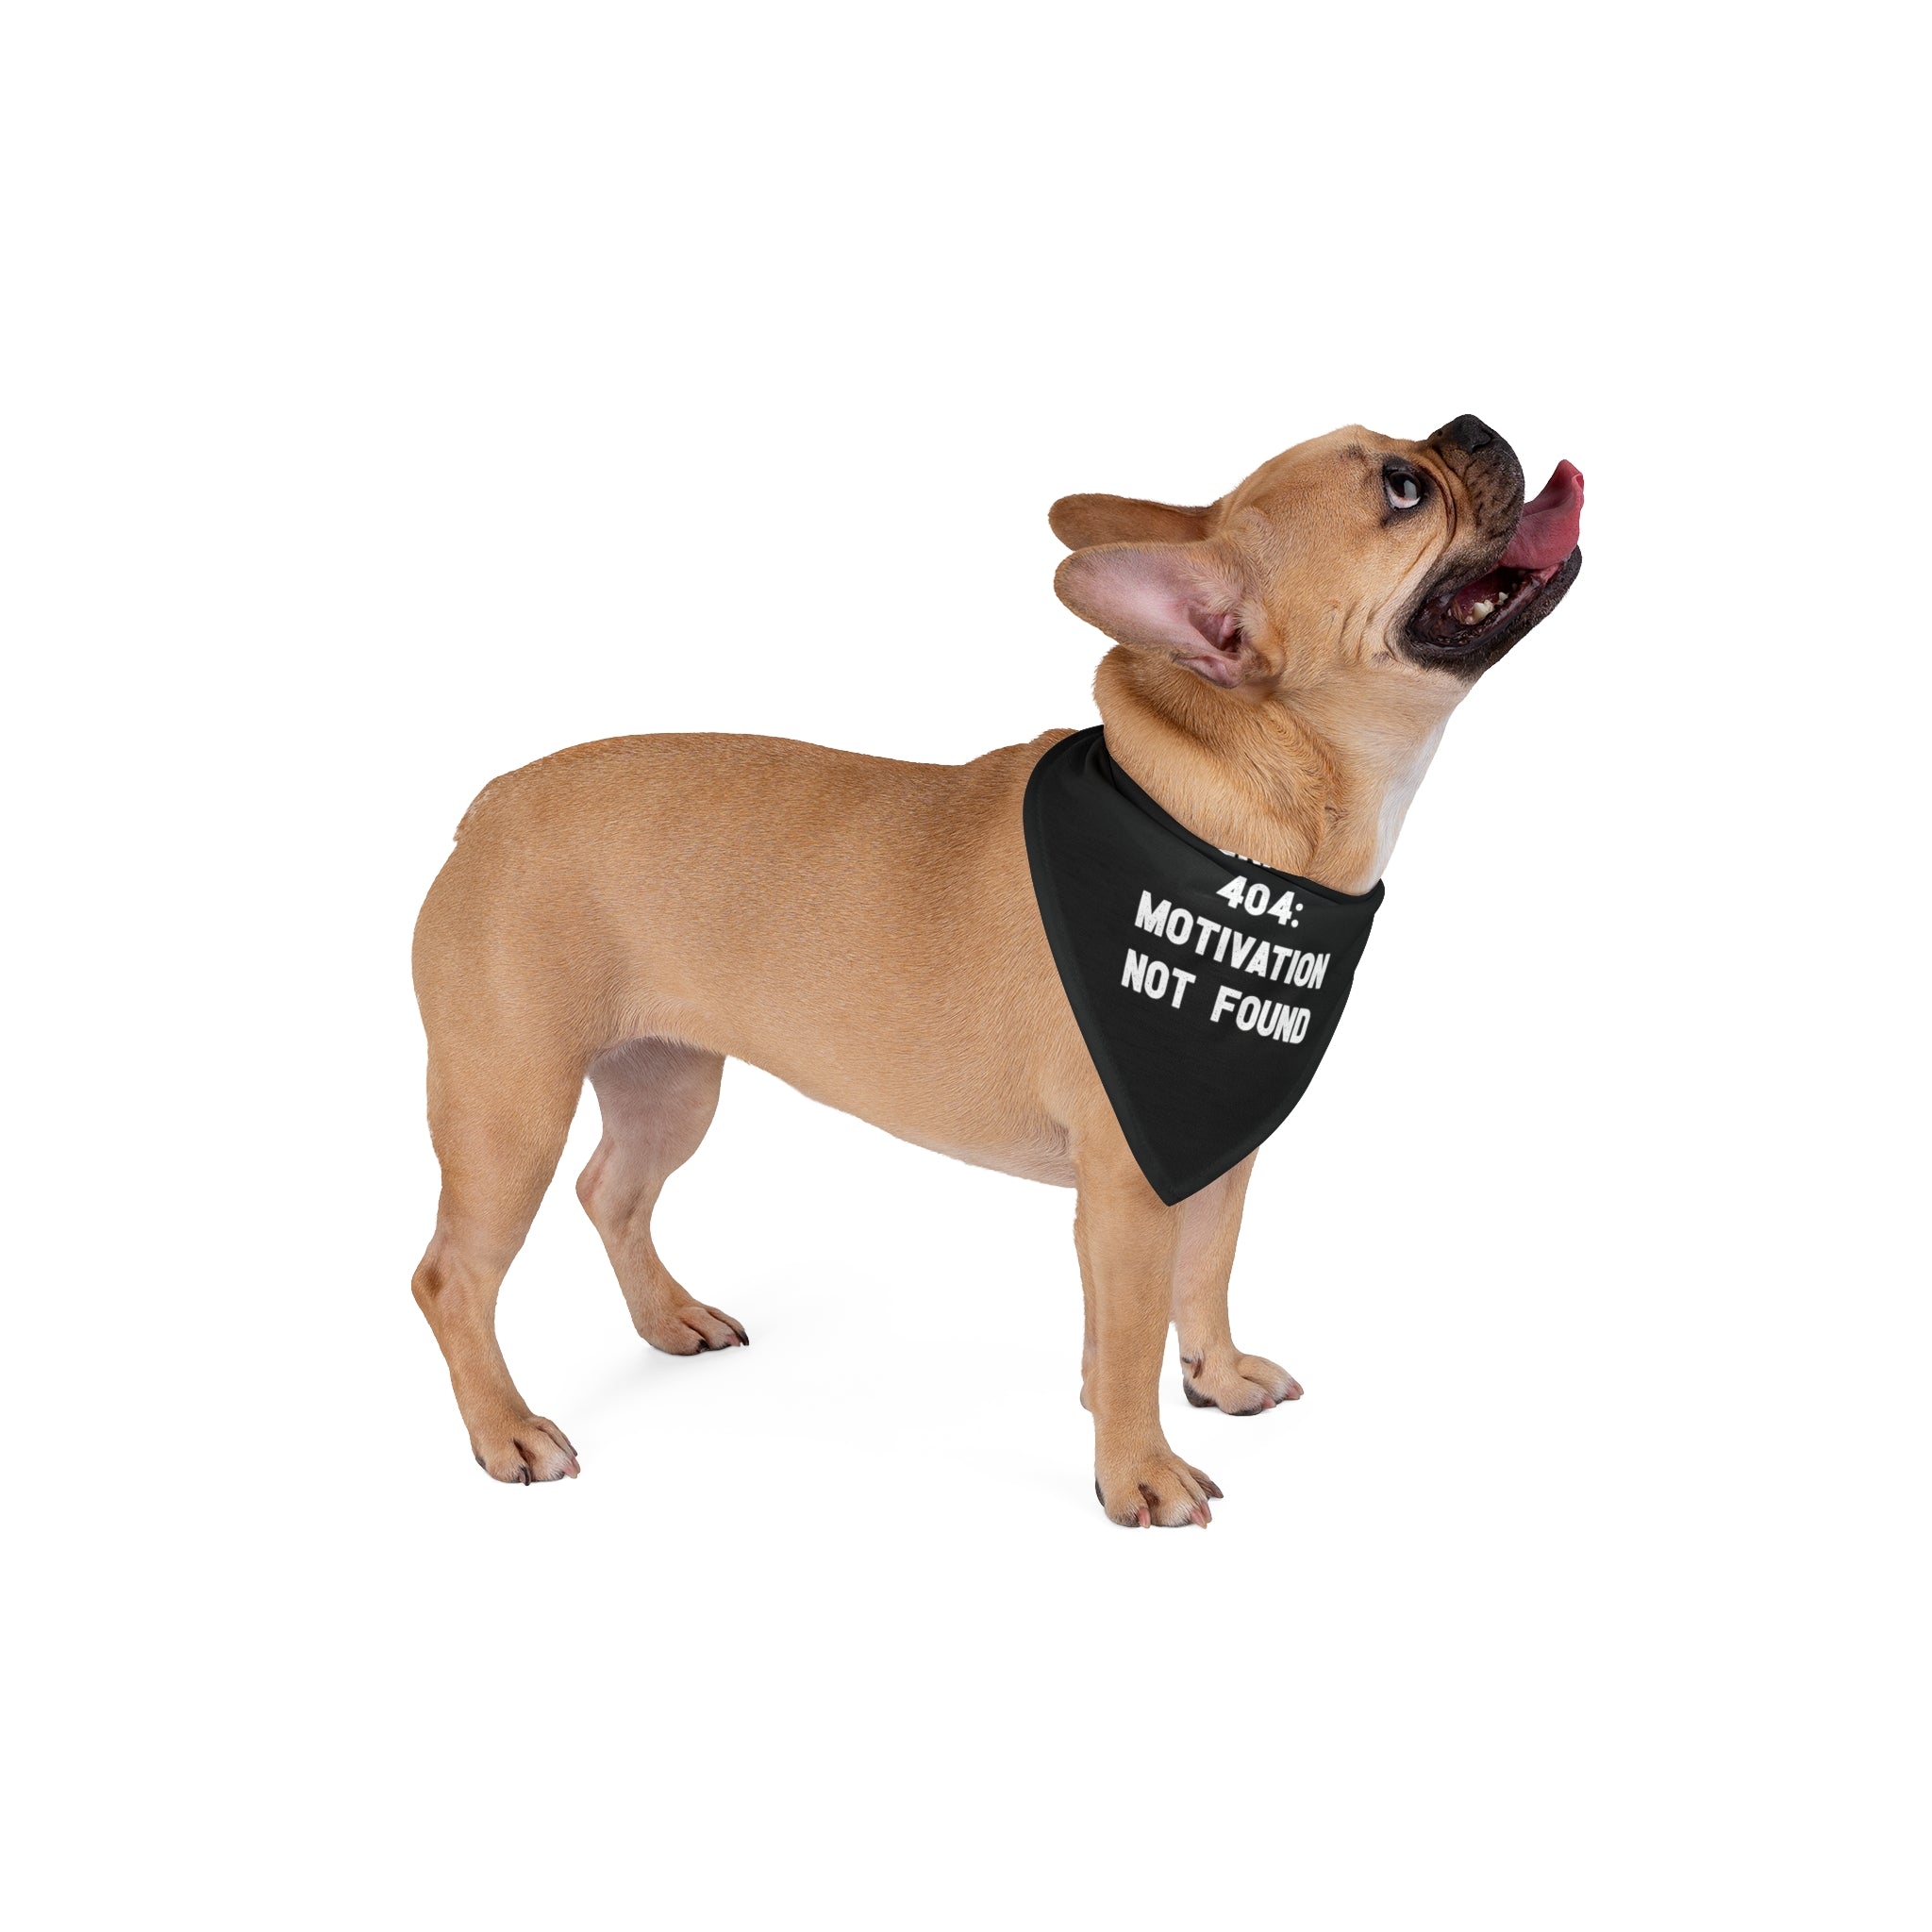 A small brown dog wearing an Error 404: Motivation not found - Pet Bandana that reads "404: Motivation Not Found" looks upward with its tongue out against a white background, enjoying the pet-friendly comfort of the soft-spun polyester fabric.